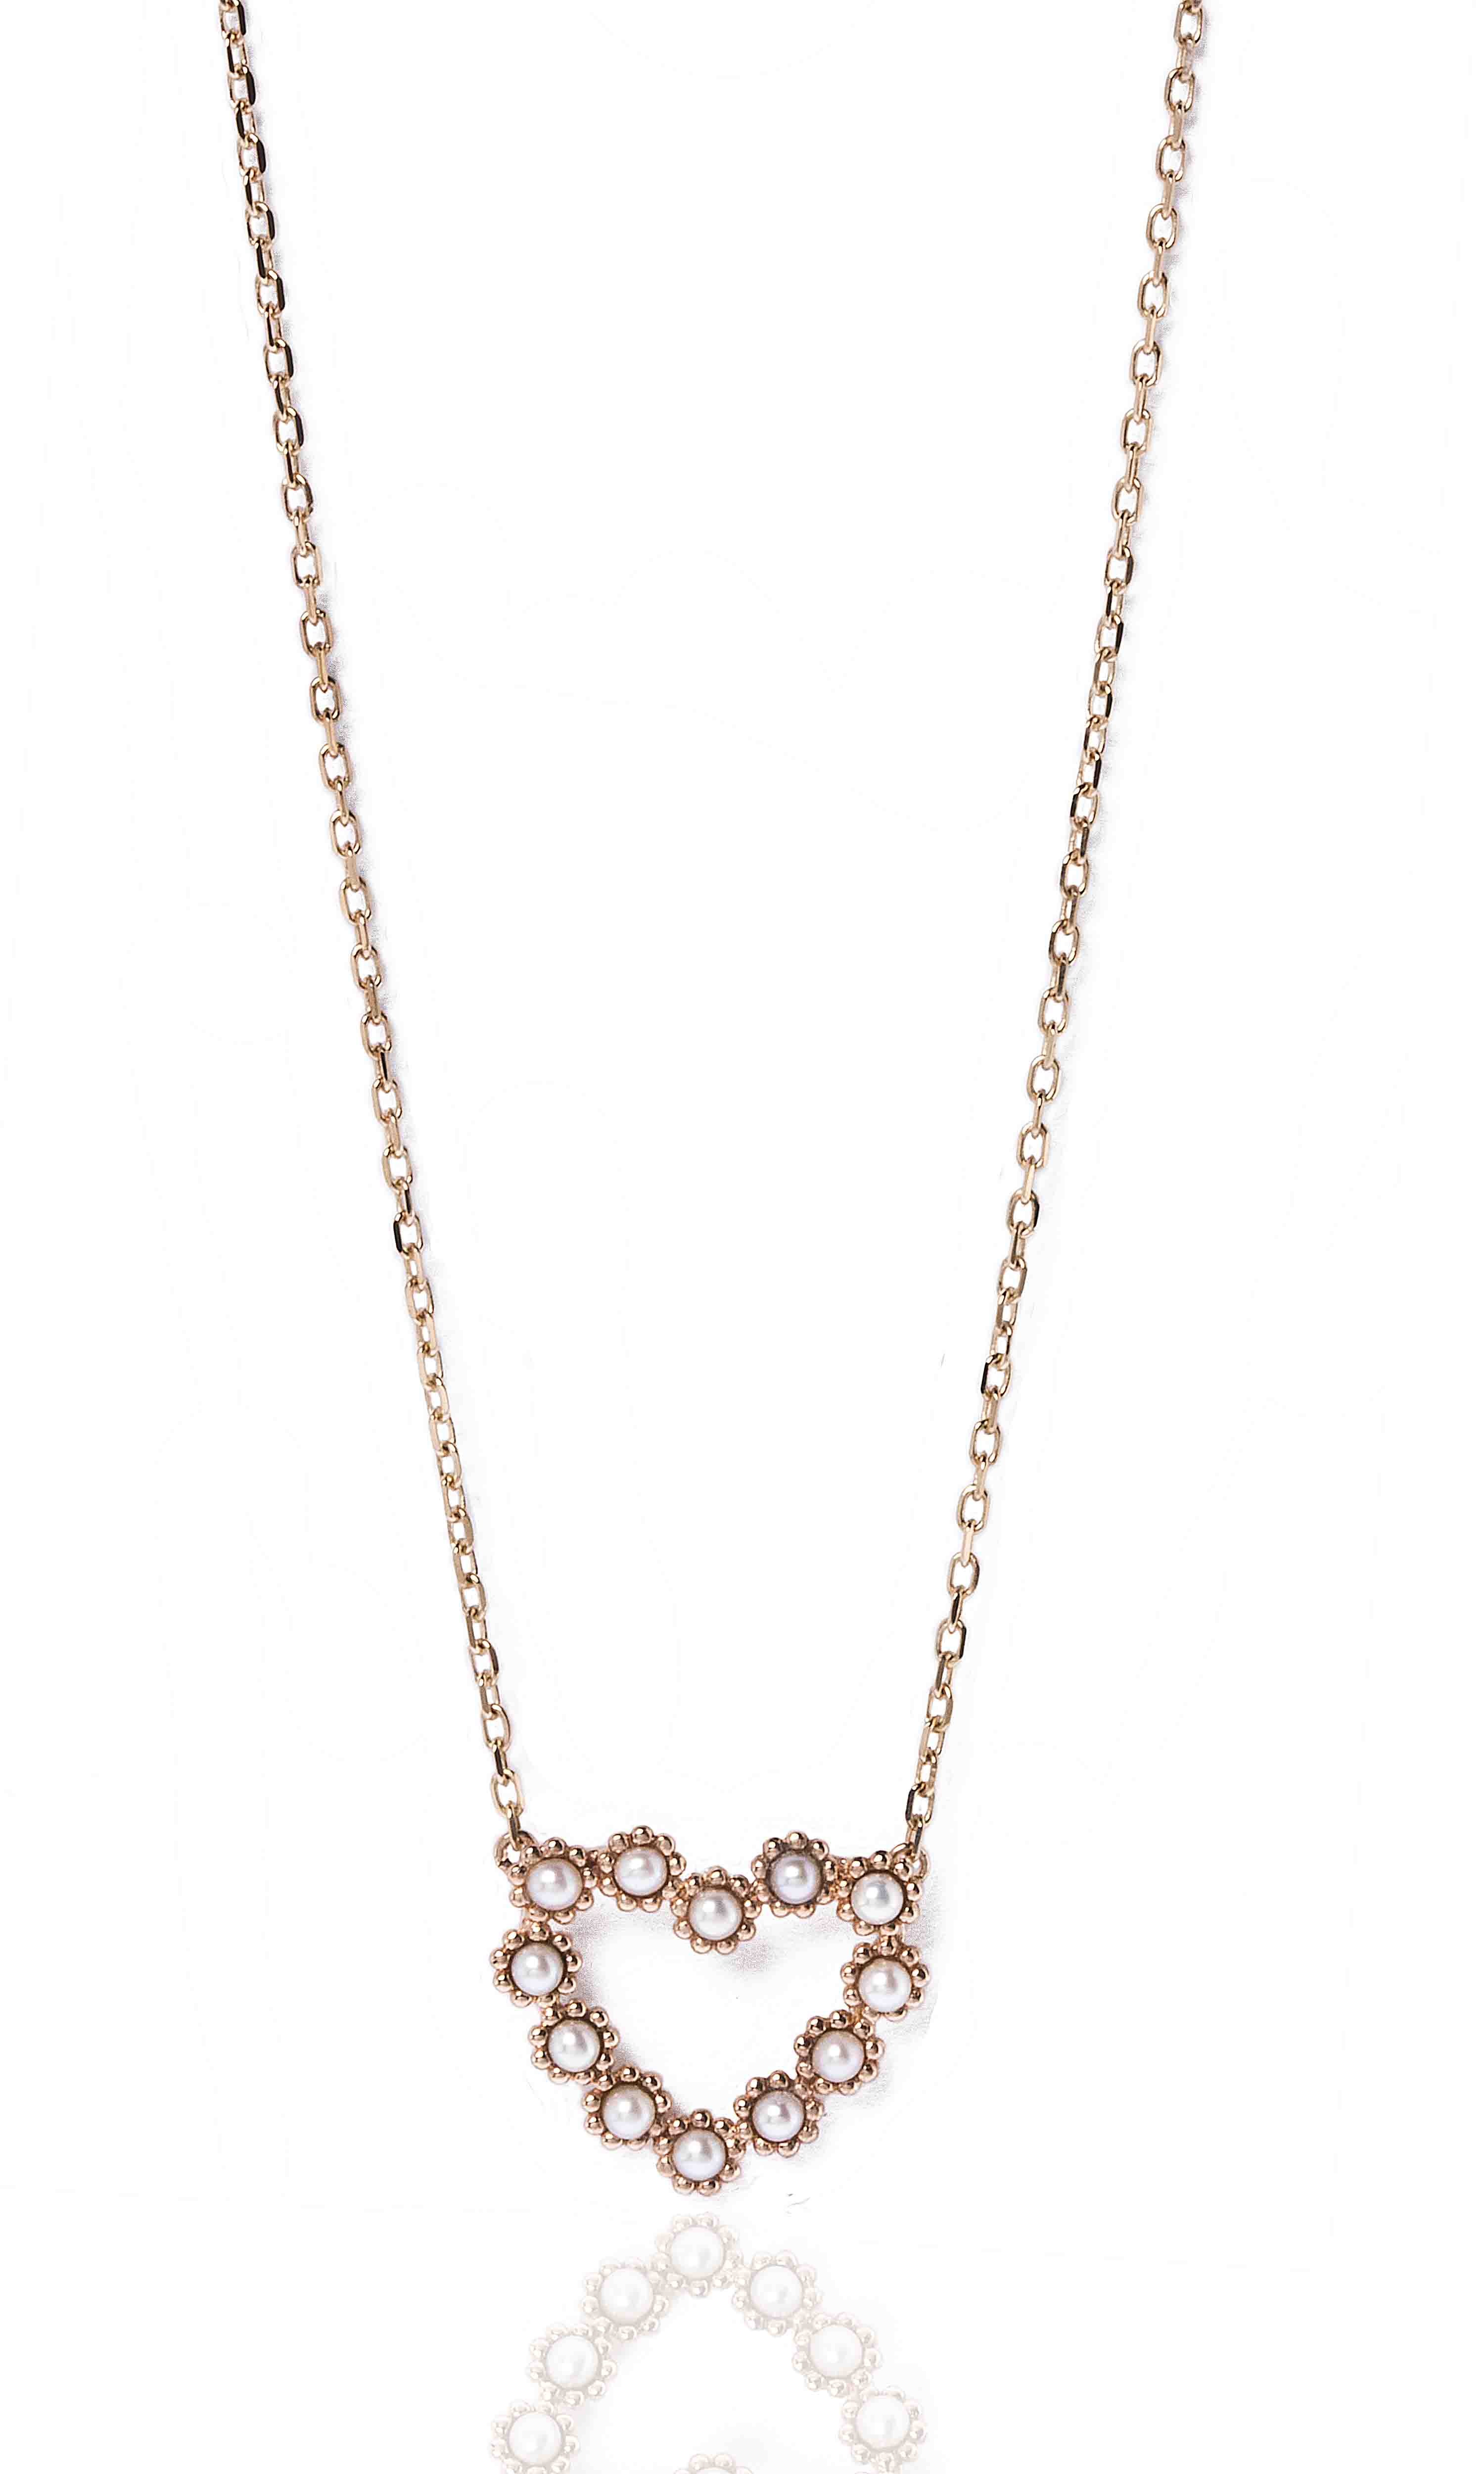 Gag Cora+º+úo Perolas O.V. - Heart Necklace with pearls in rose gold